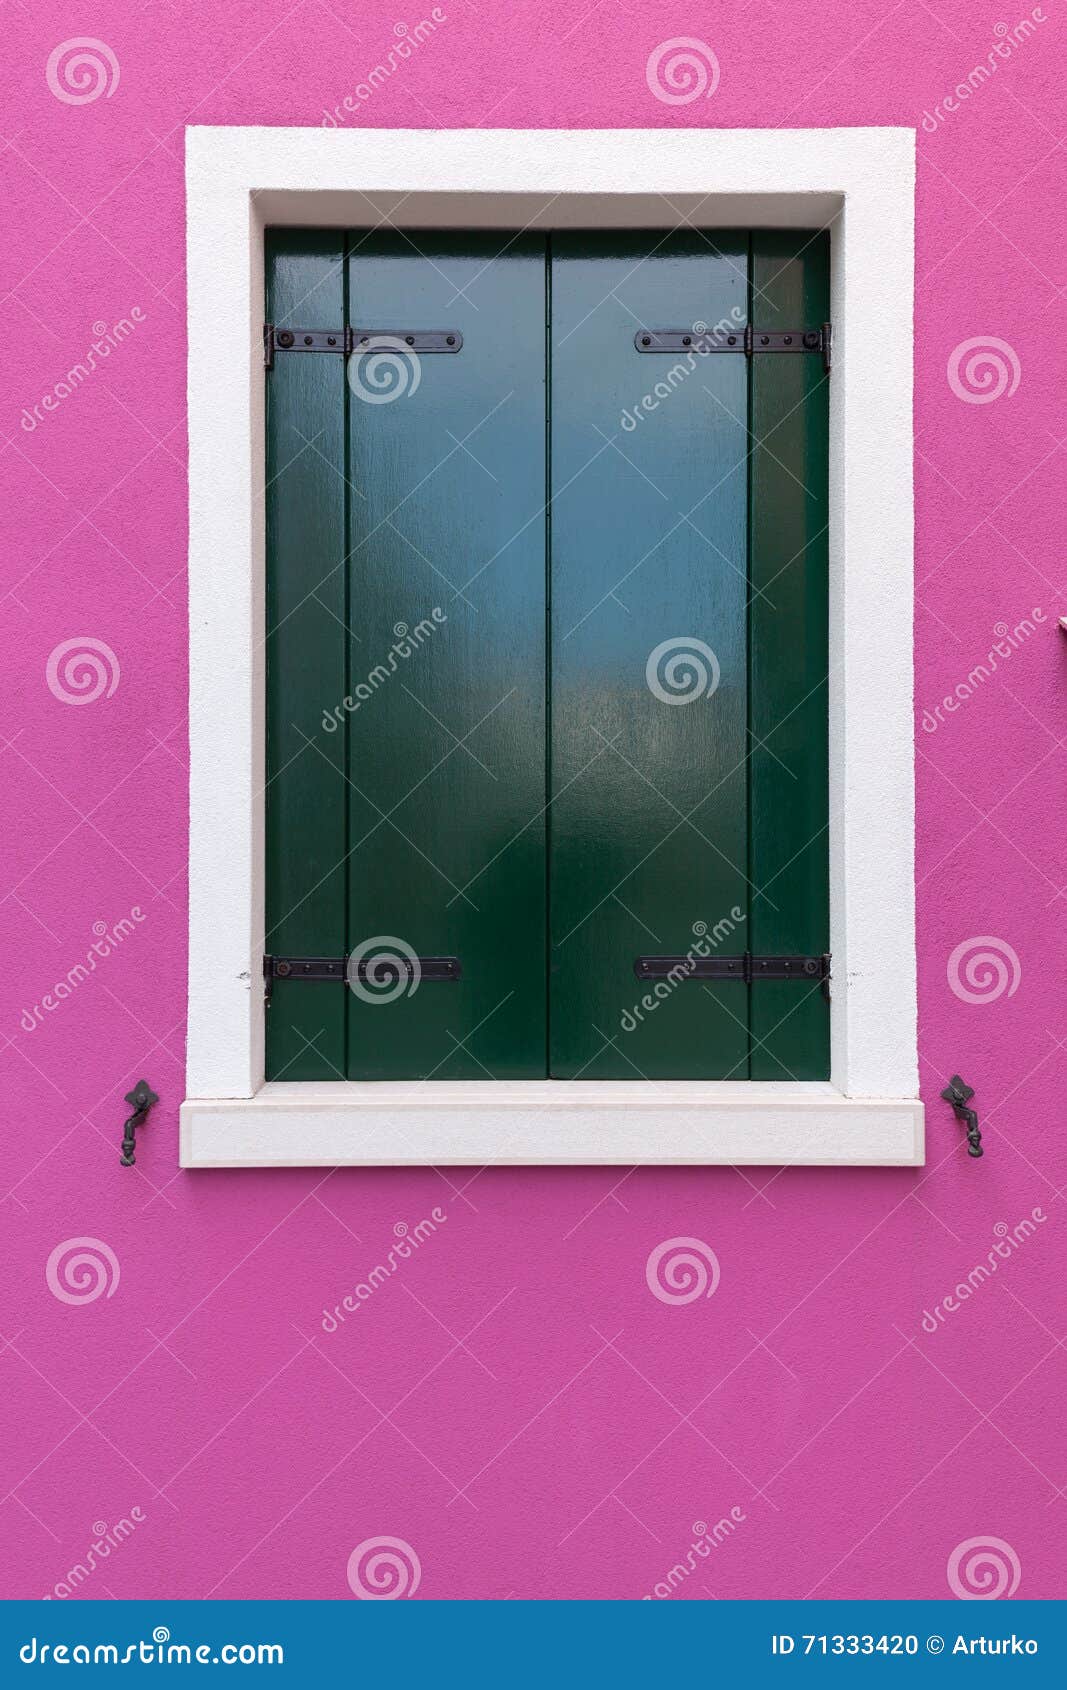 old window with dark green shutters on pink (fucsia) wall